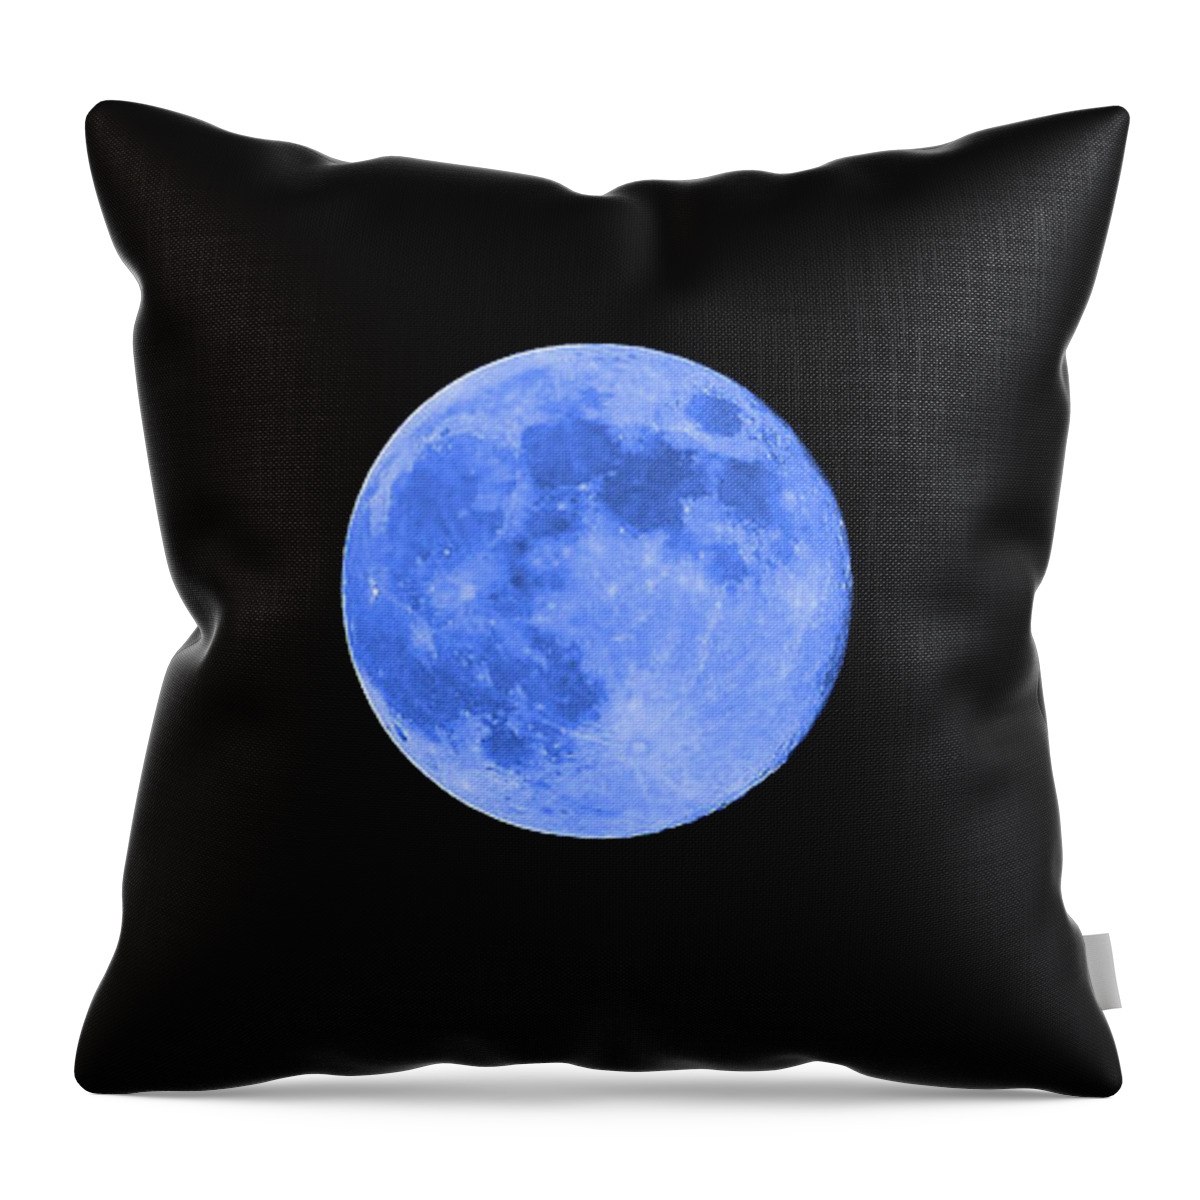 Blue Moon Throw Pillow featuring the photograph Blue Moon by Al Powell Photography USA